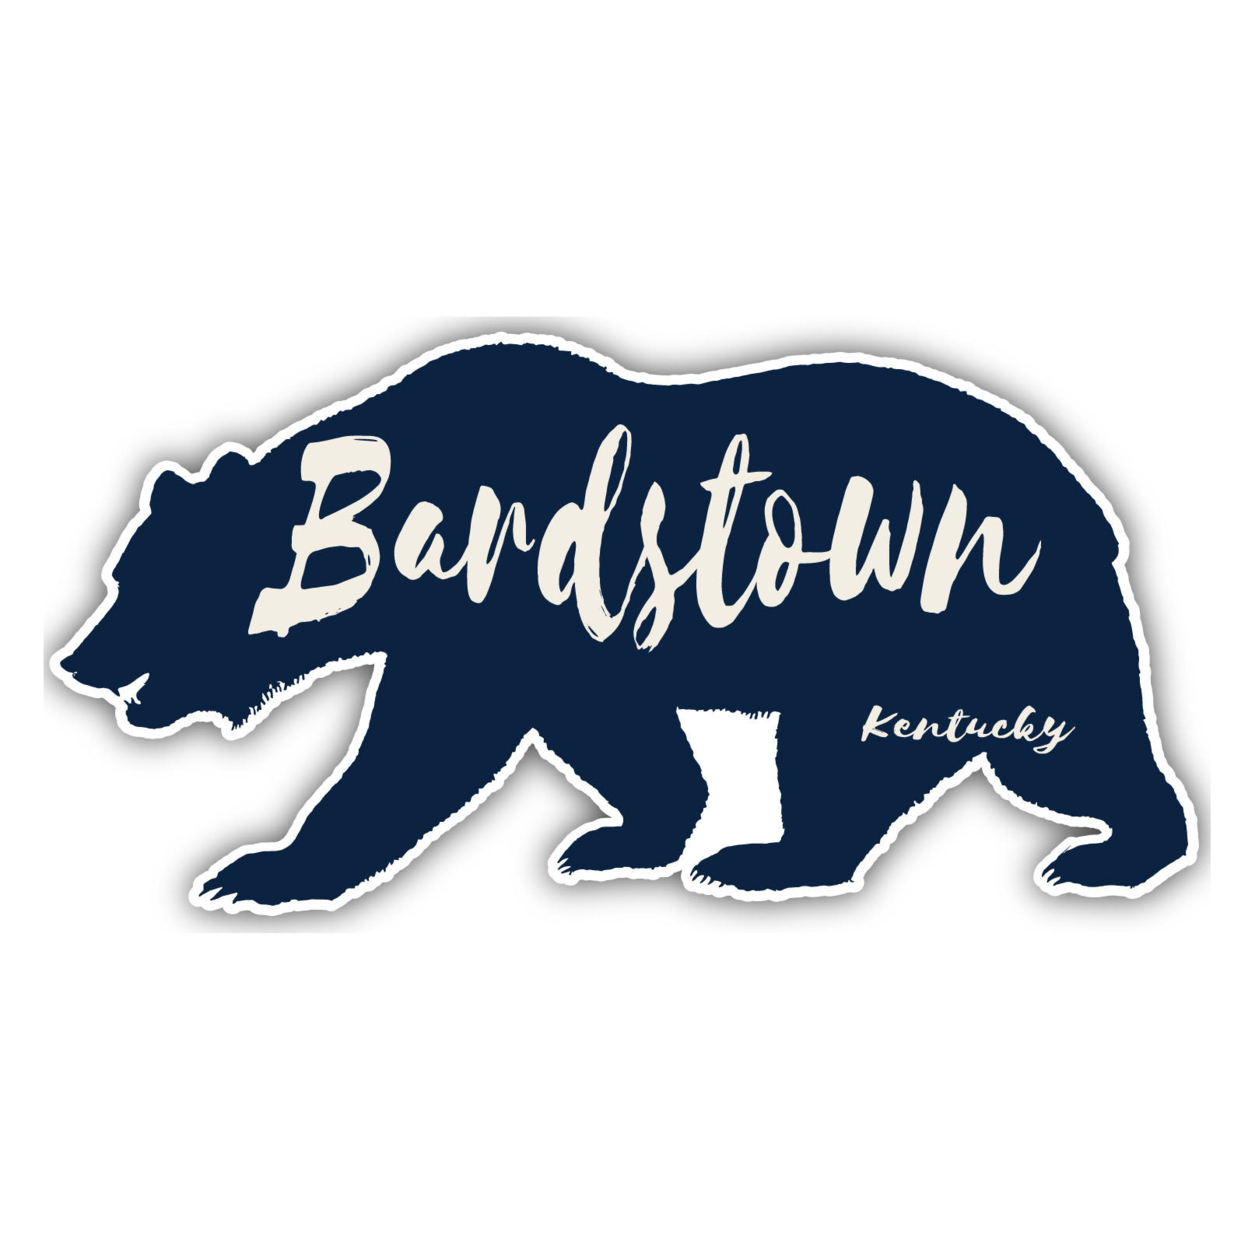 Bardstown Kentucky Souvenir Decorative Stickers (Choose Theme And Size) - 4-Pack, 4-Inch, Great Outdoors